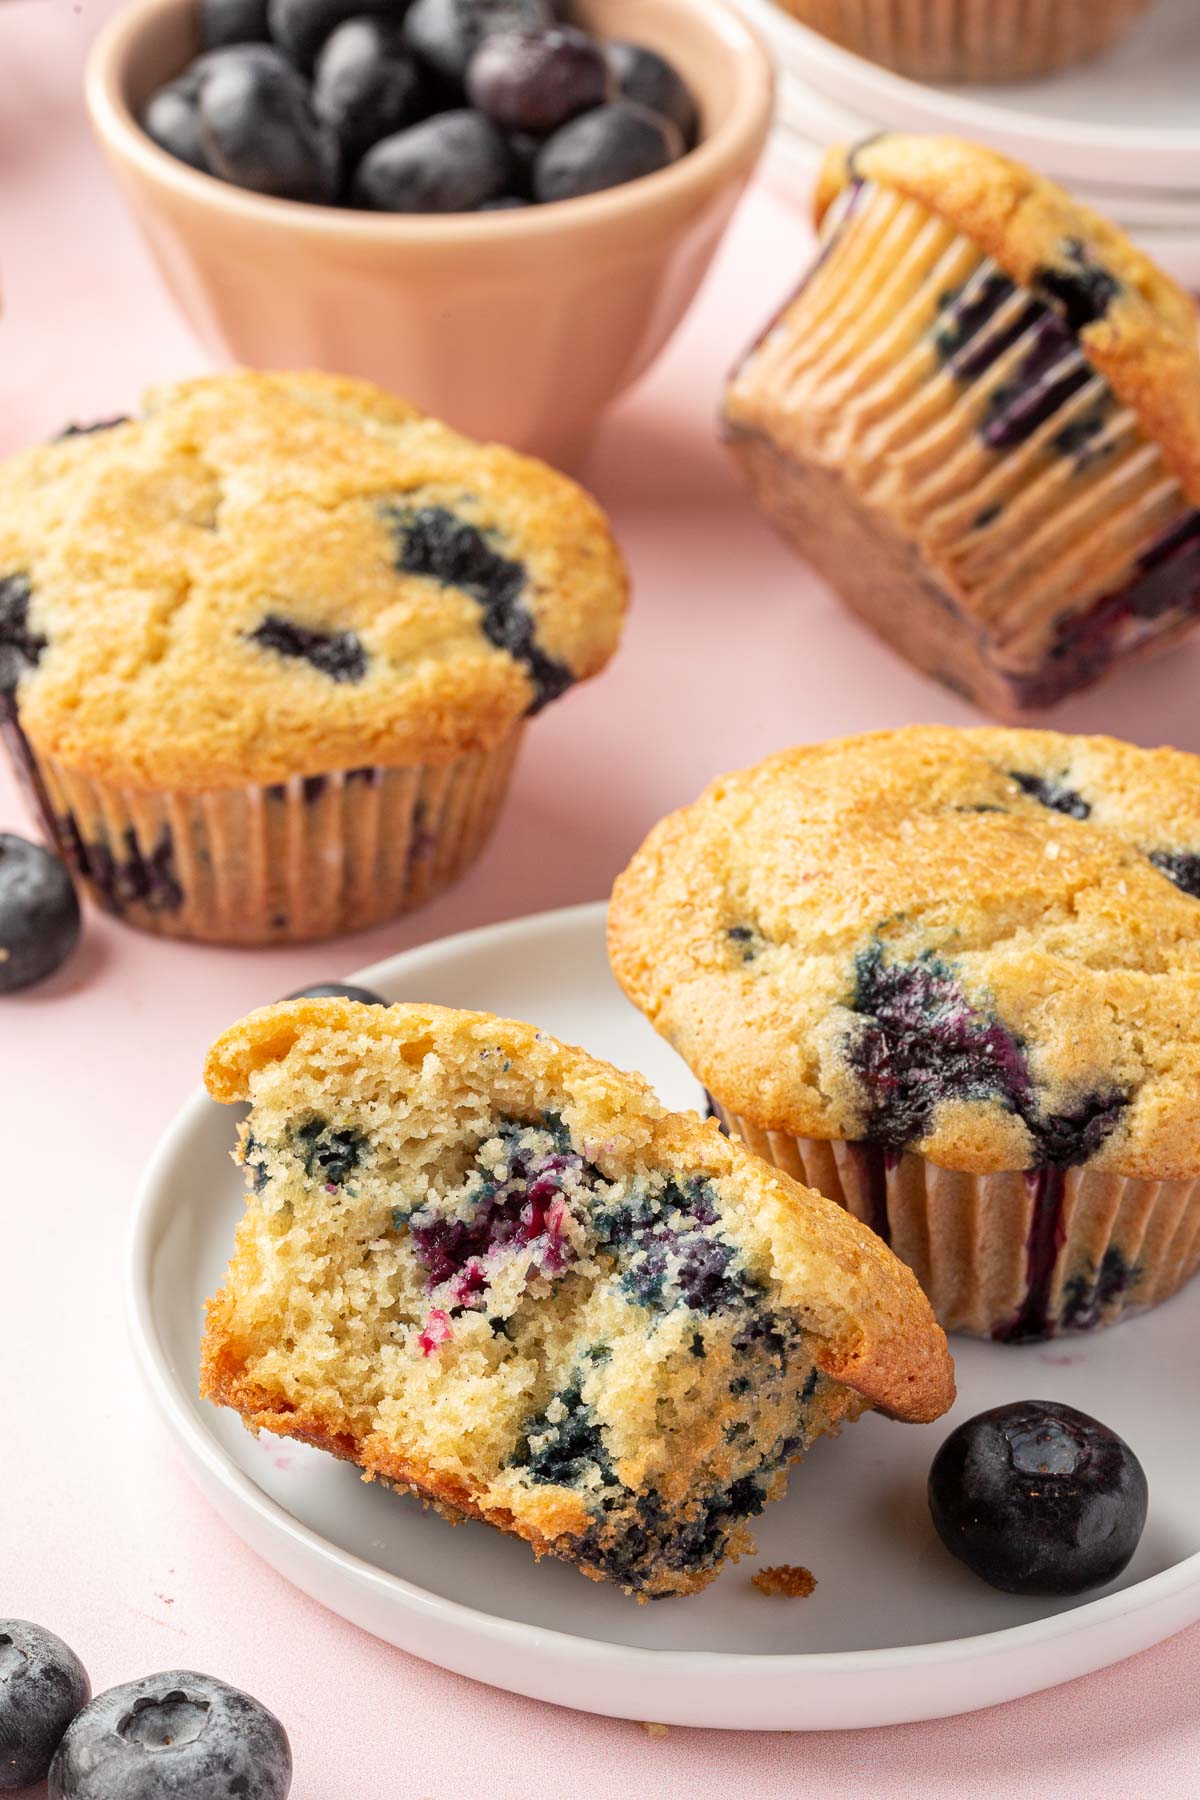 A gluten free blueberry muffin cut in half on a small plate with additional muffins and fresh blueberries in the background.